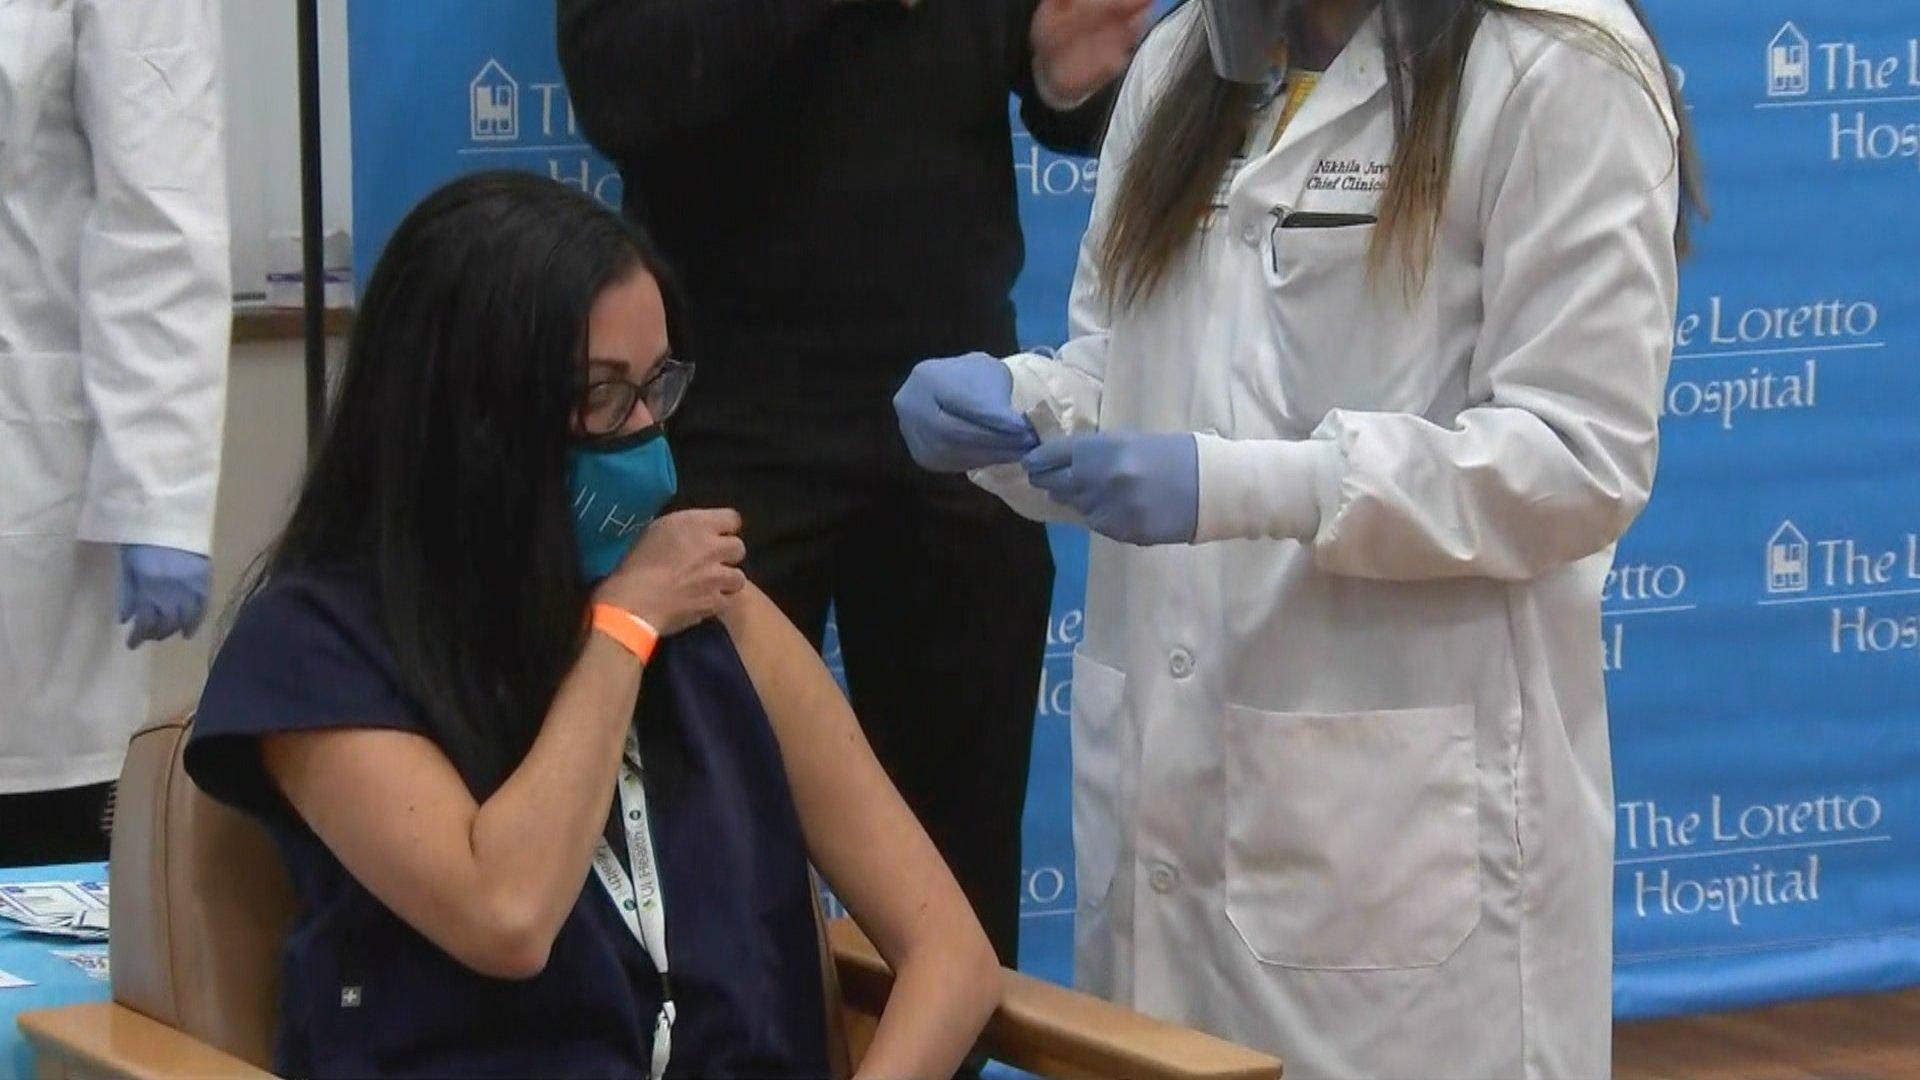 Dr. Marina Del Rios receives the first dose of the COVID-19 vaccine by city officials on Tuesday, Dec. 15, 2020 at The Loretto Hospital. (WTTW News)